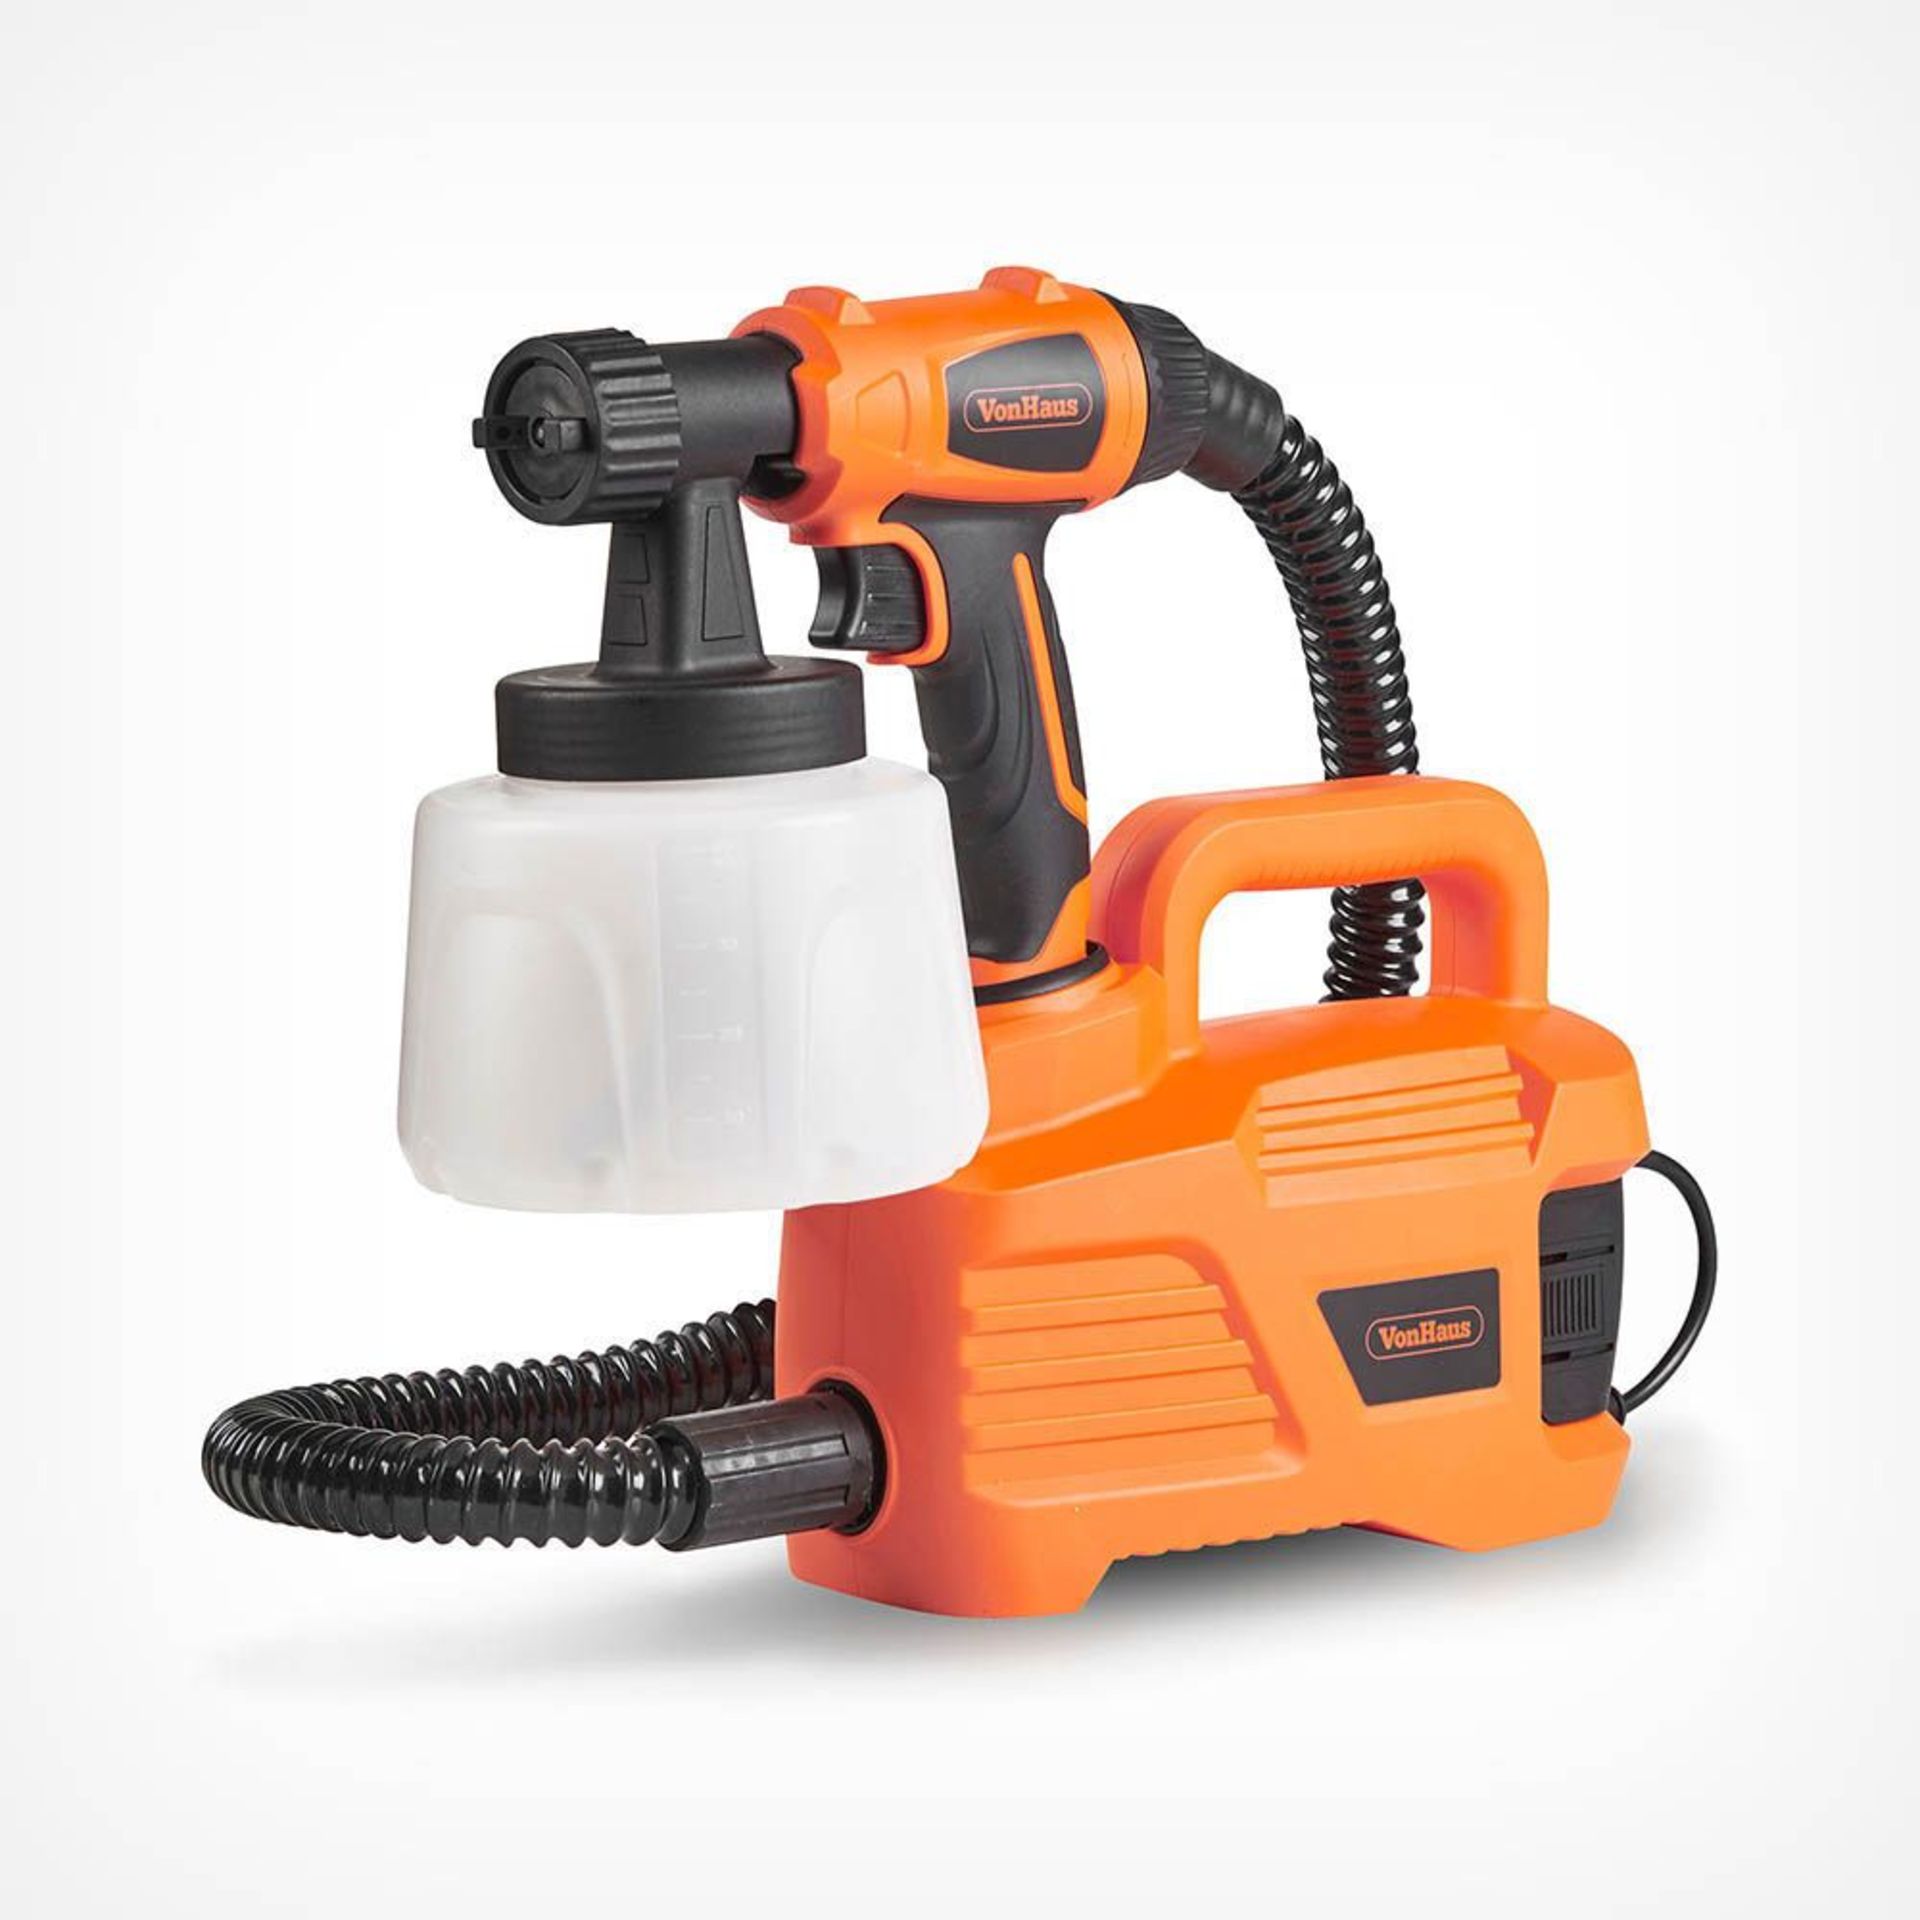 800W Paint Sprayer. - BI. Boasting a forceful 800W motor, the paint station delivers a strong